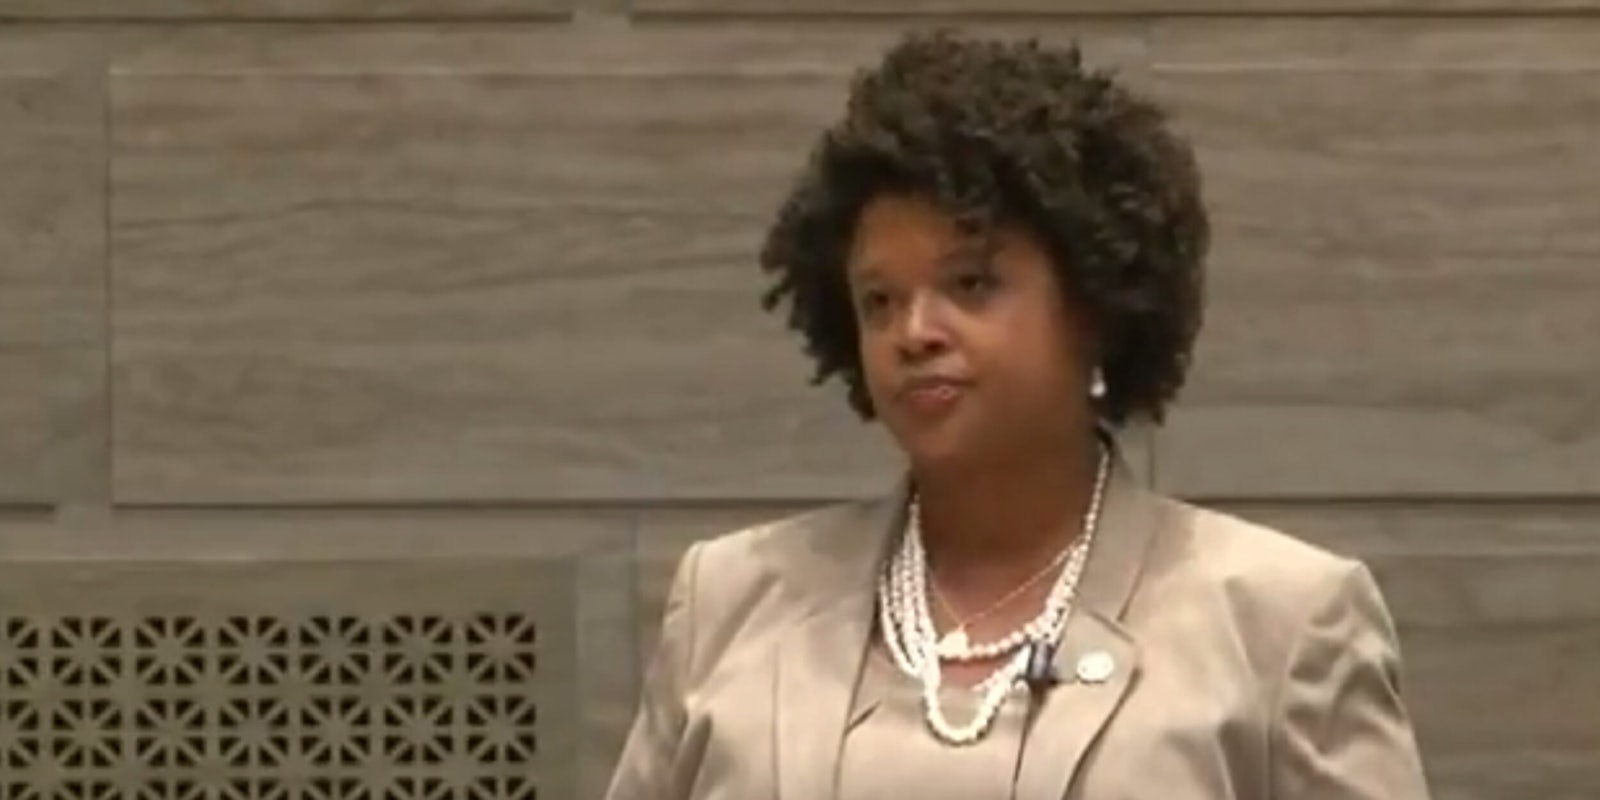 Sen. Maria Chappelle-Nadal posted on Facebook that she hopes Trump gets assassinated.